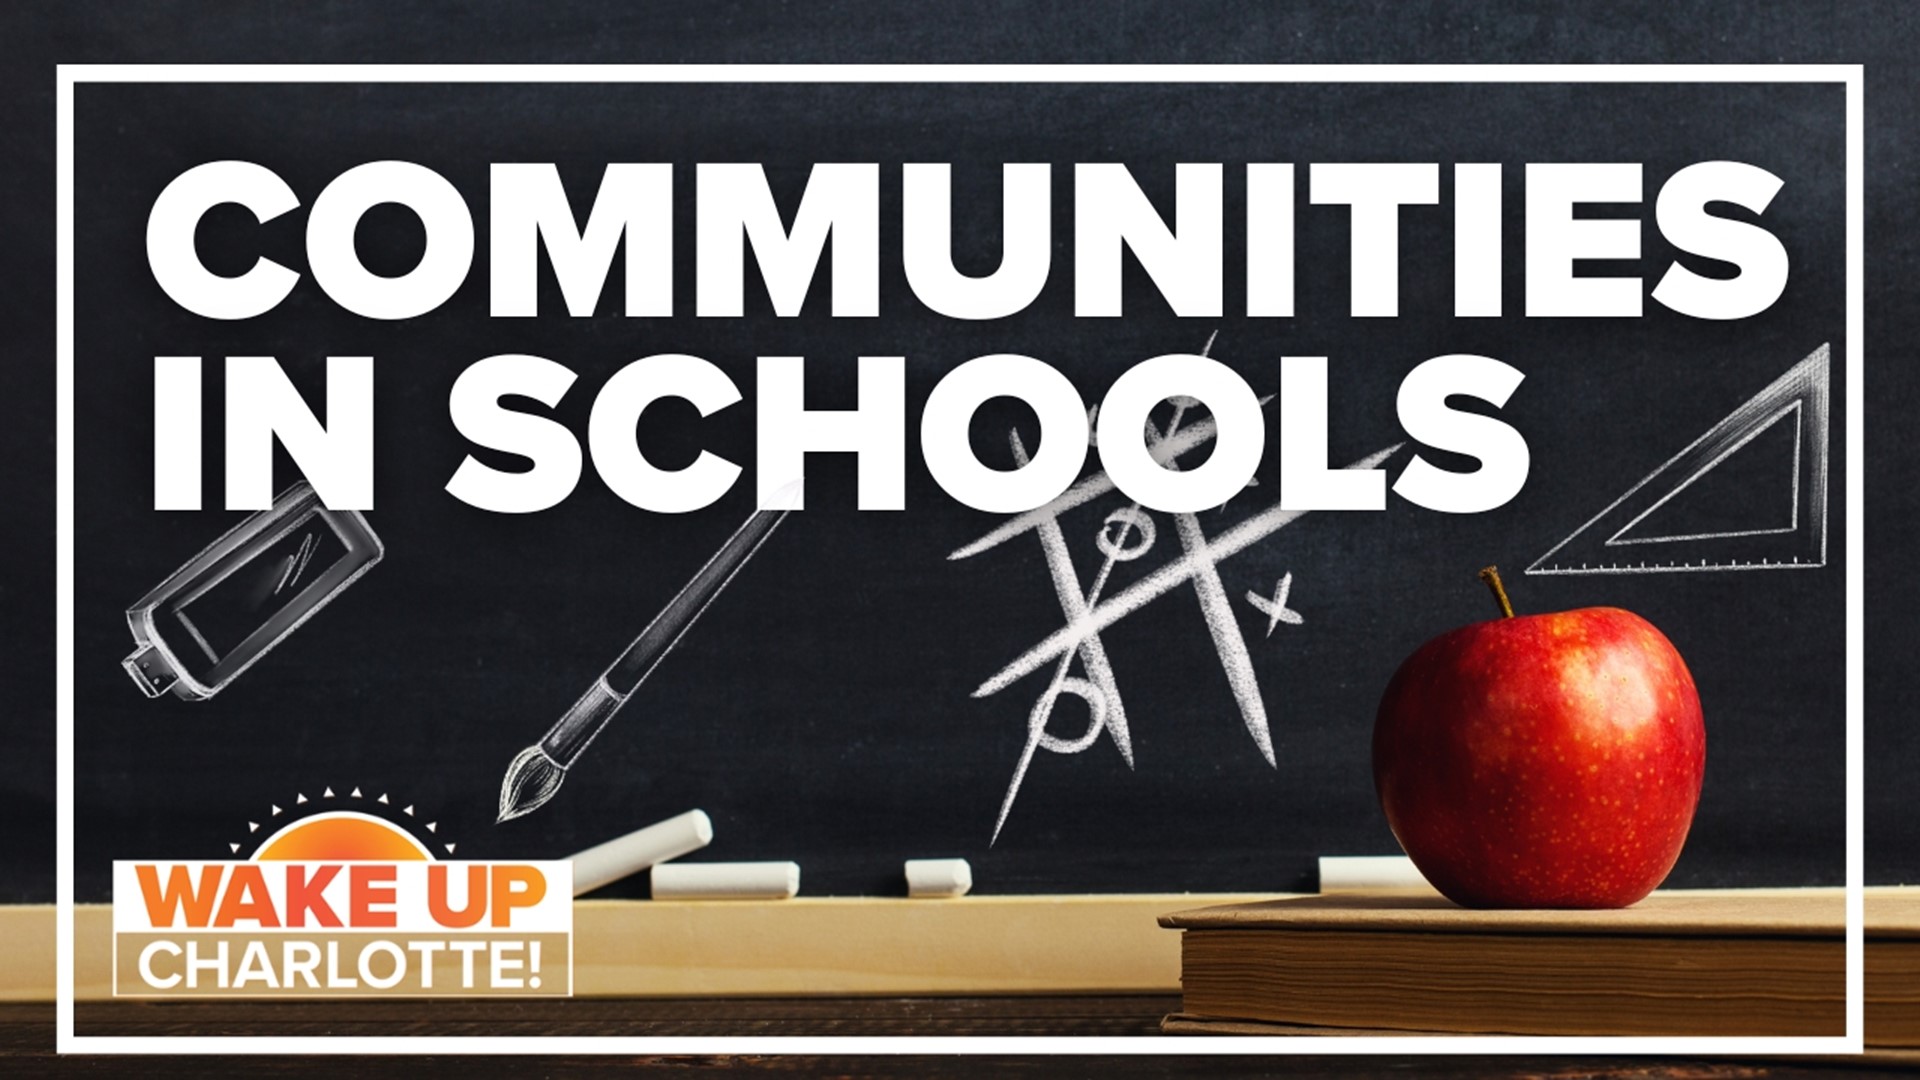 Communities in Schools is the nation's largest organization dedicated to empowering students to stay in school and on a path to a brighter future.